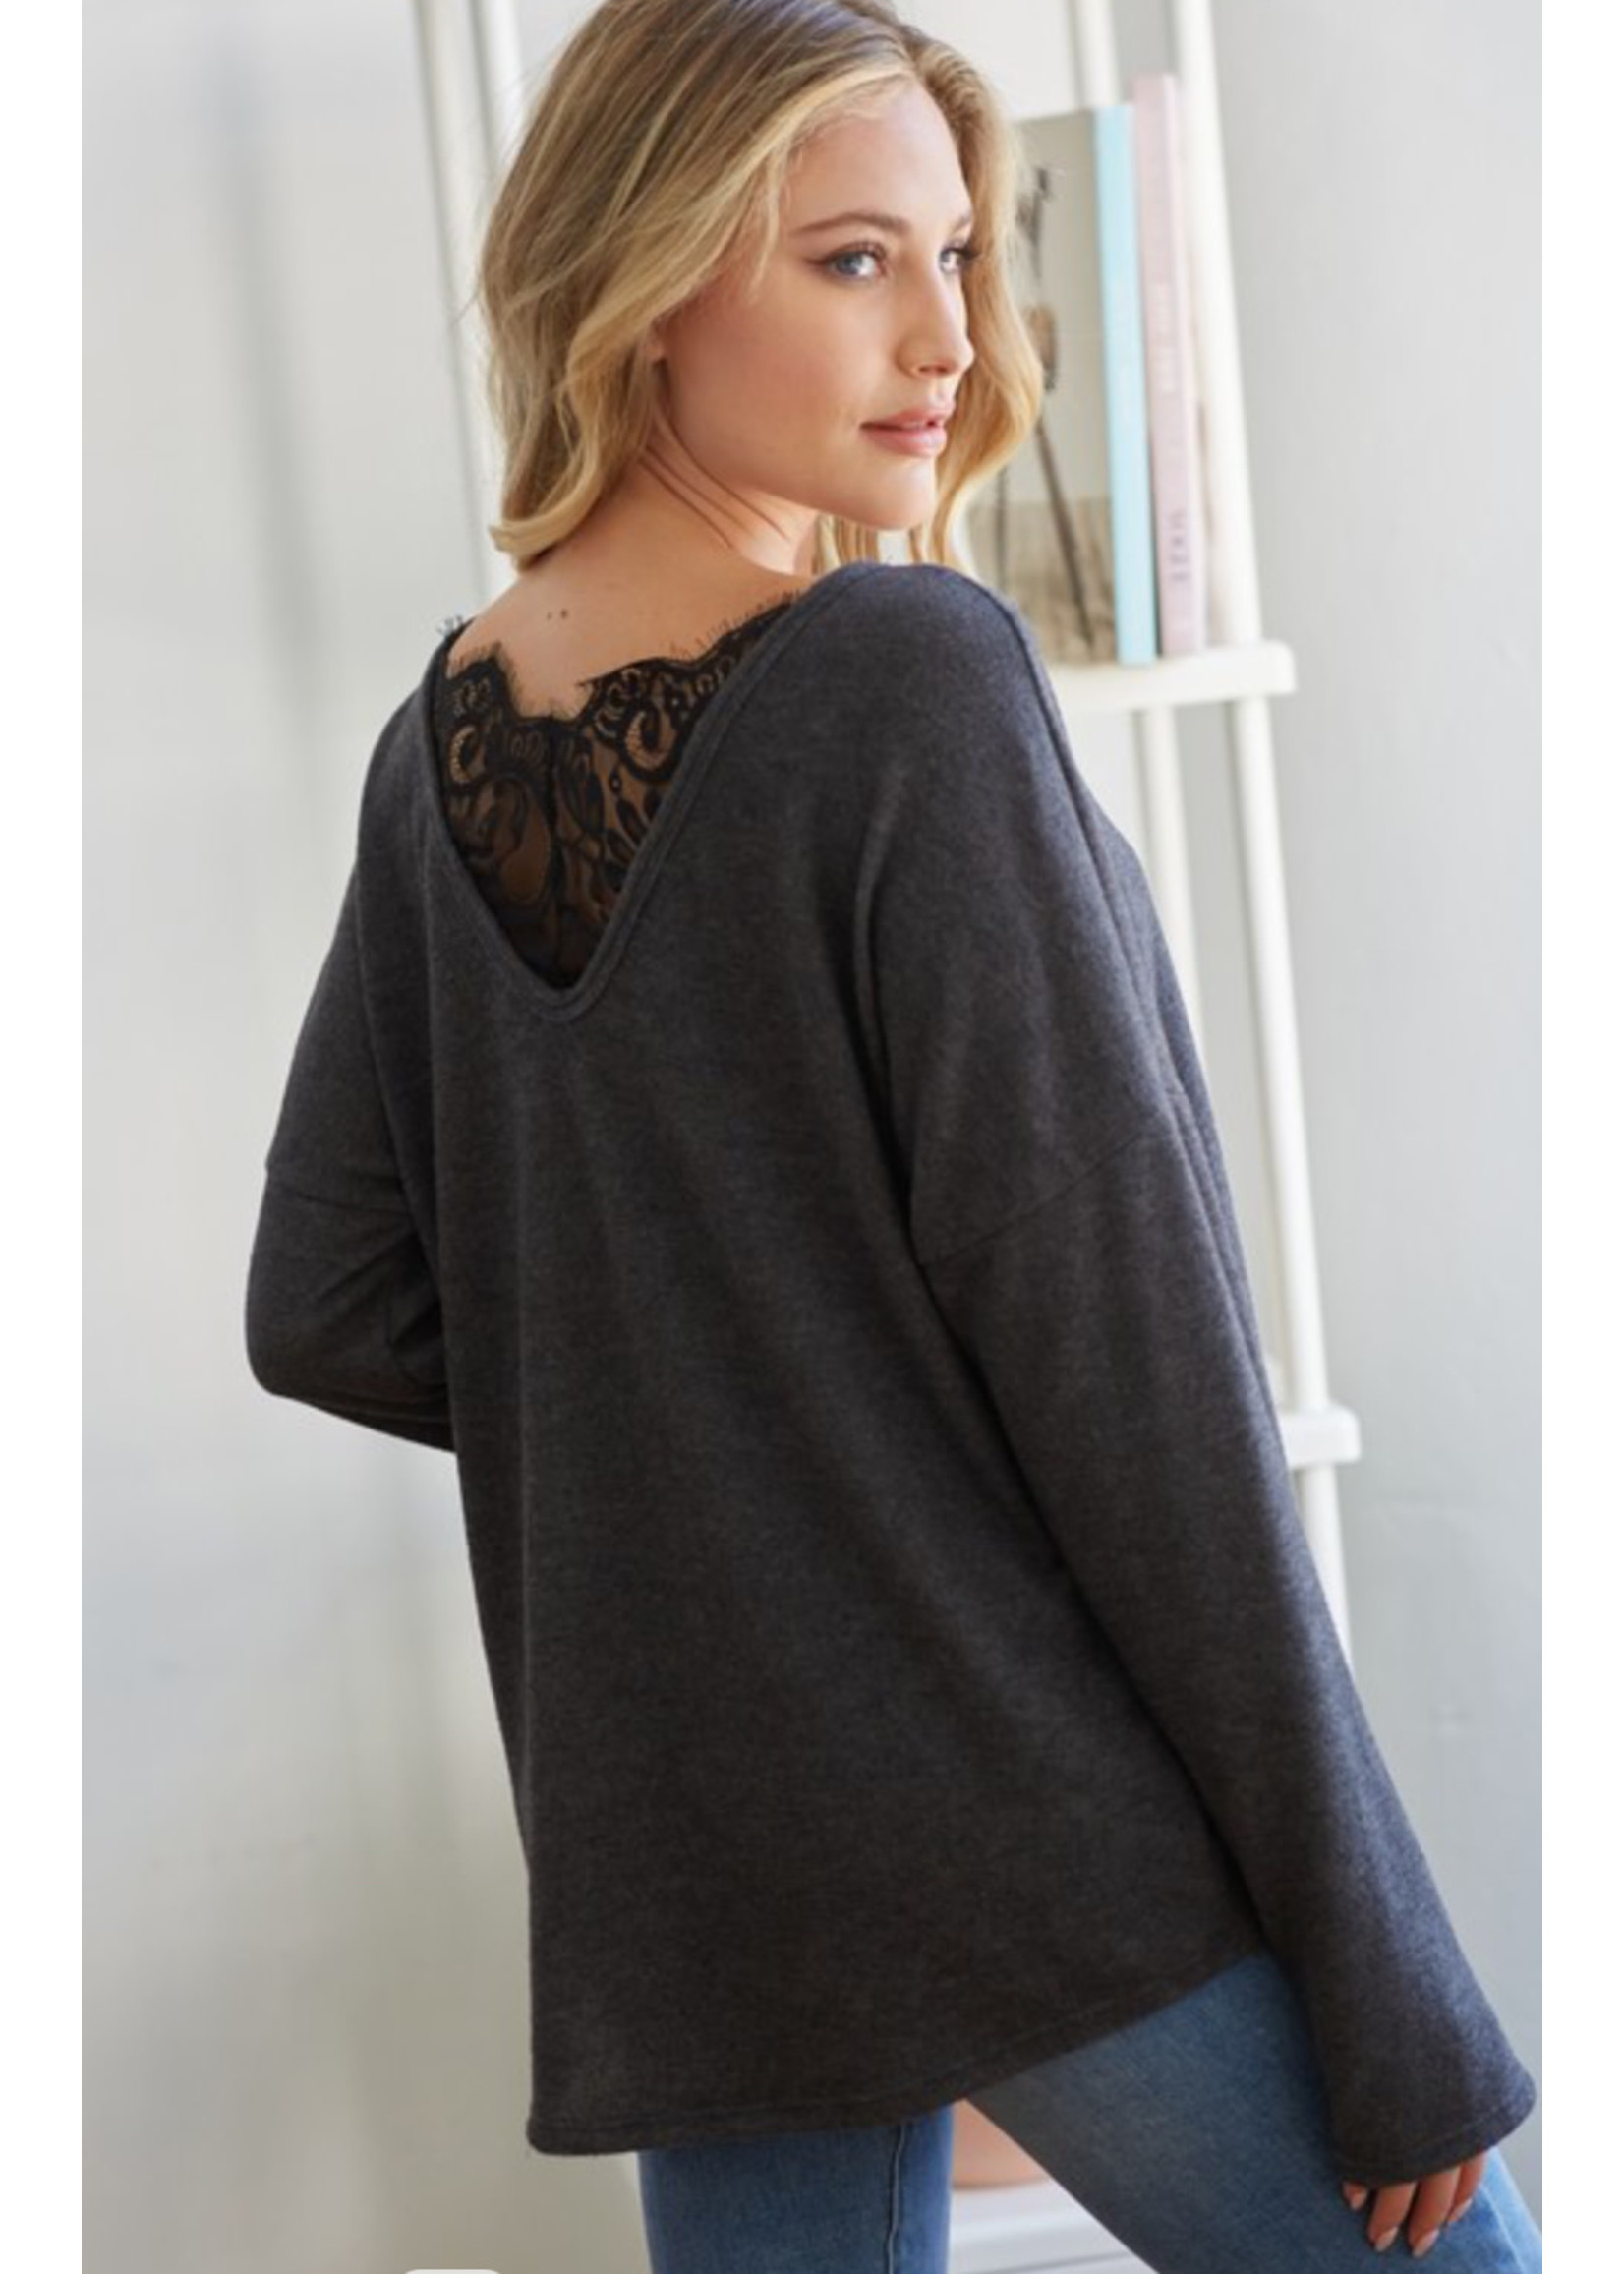 Long sleeve with Lace back-3 colors